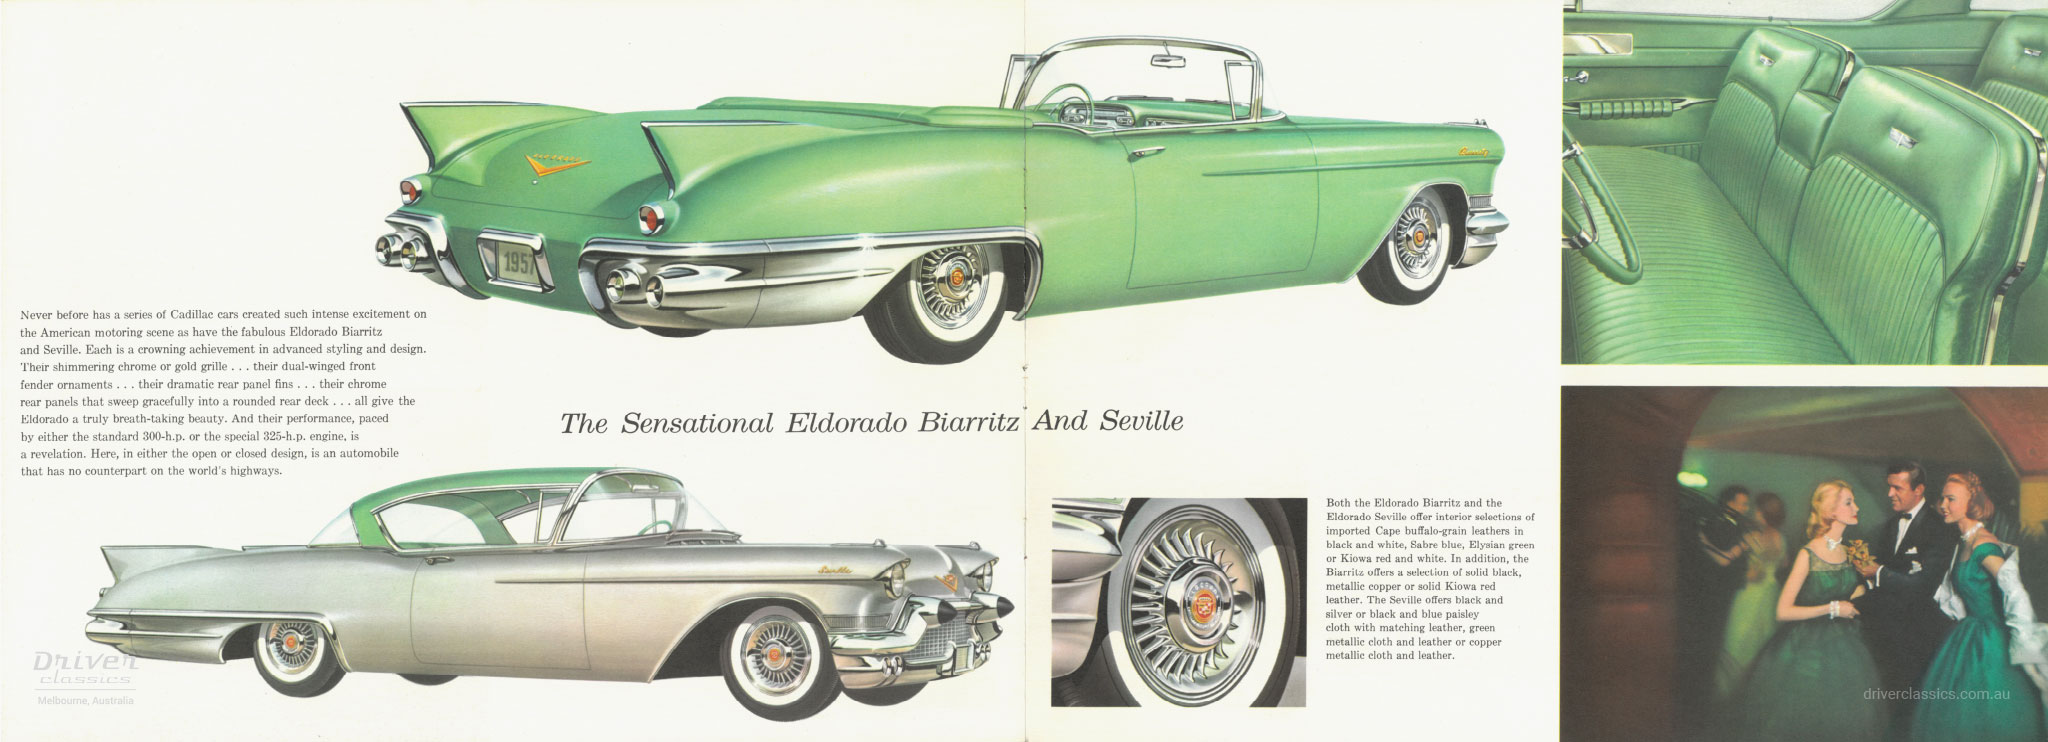 Page from 1957 Cadillac brochure. Reads 